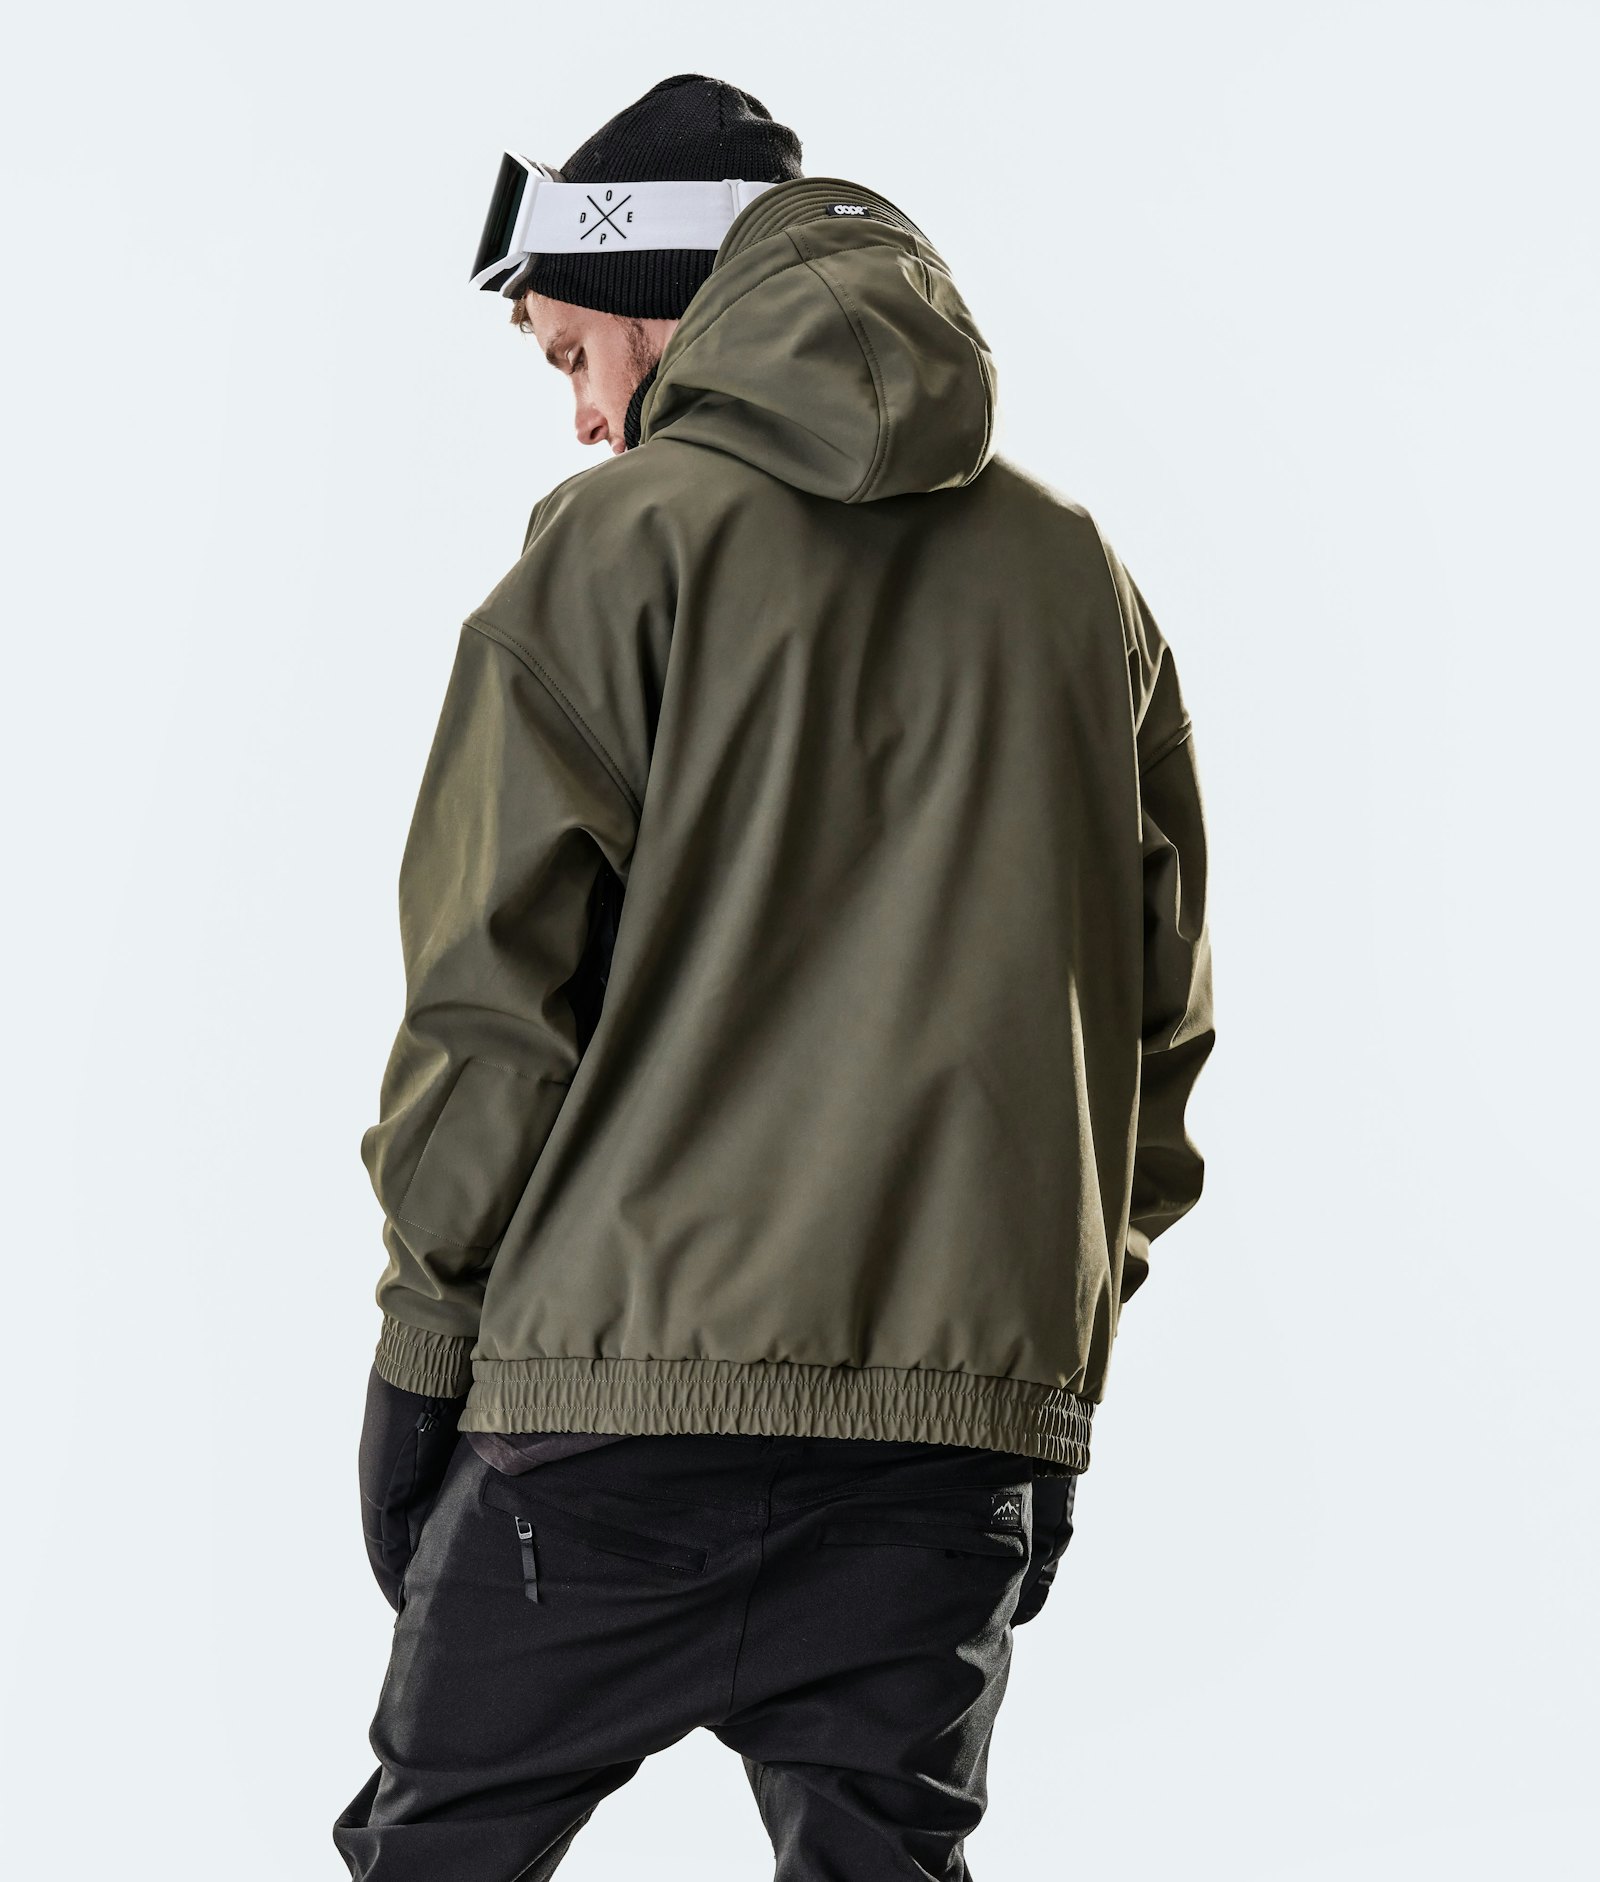 Cyclone 2020 Veste Snowboard Homme Olive Green